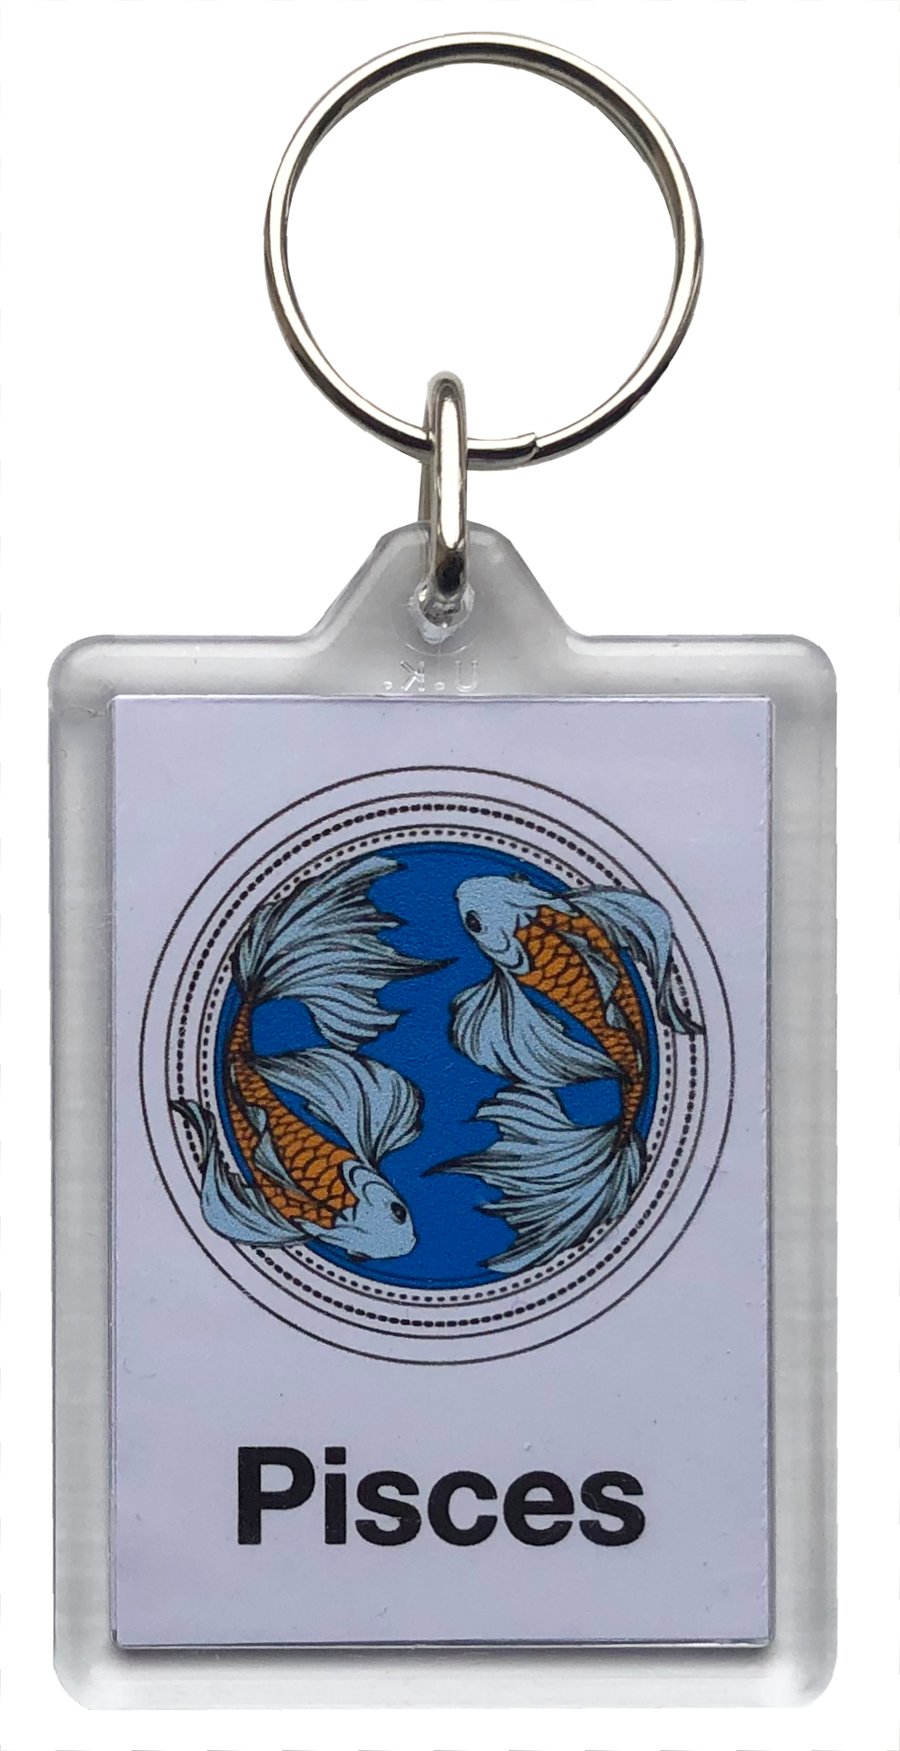 Pisces Key Ring with 50x35mm Insert- The Two Fishes (19th February - 20th March)